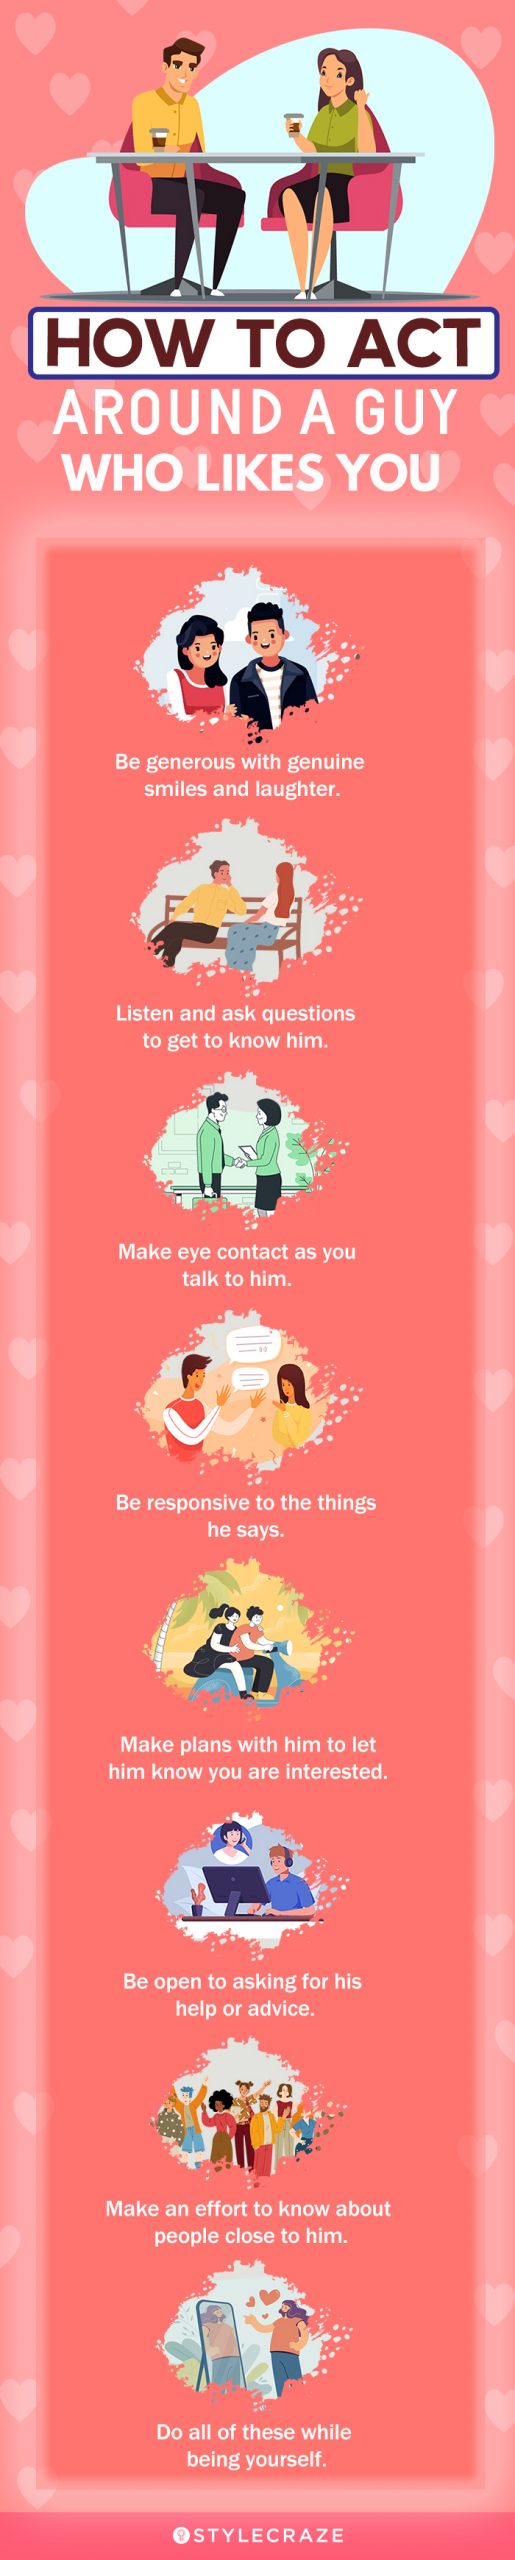 how to act around a guy who likes you [infographic]